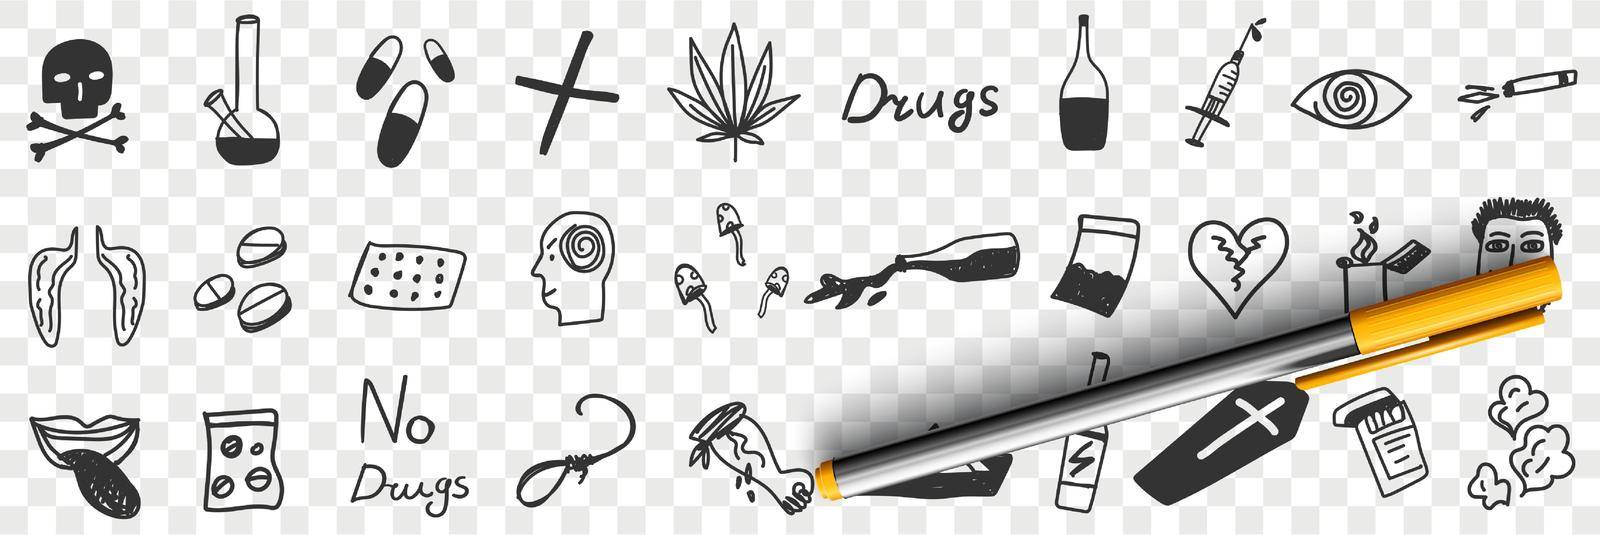 Danger of drugs doodle set. Collection of hand drawn drugs pills lungs alcohol grass bottles addiction symbols poison coffins suicide human brain mushrooms isolated on transparent background